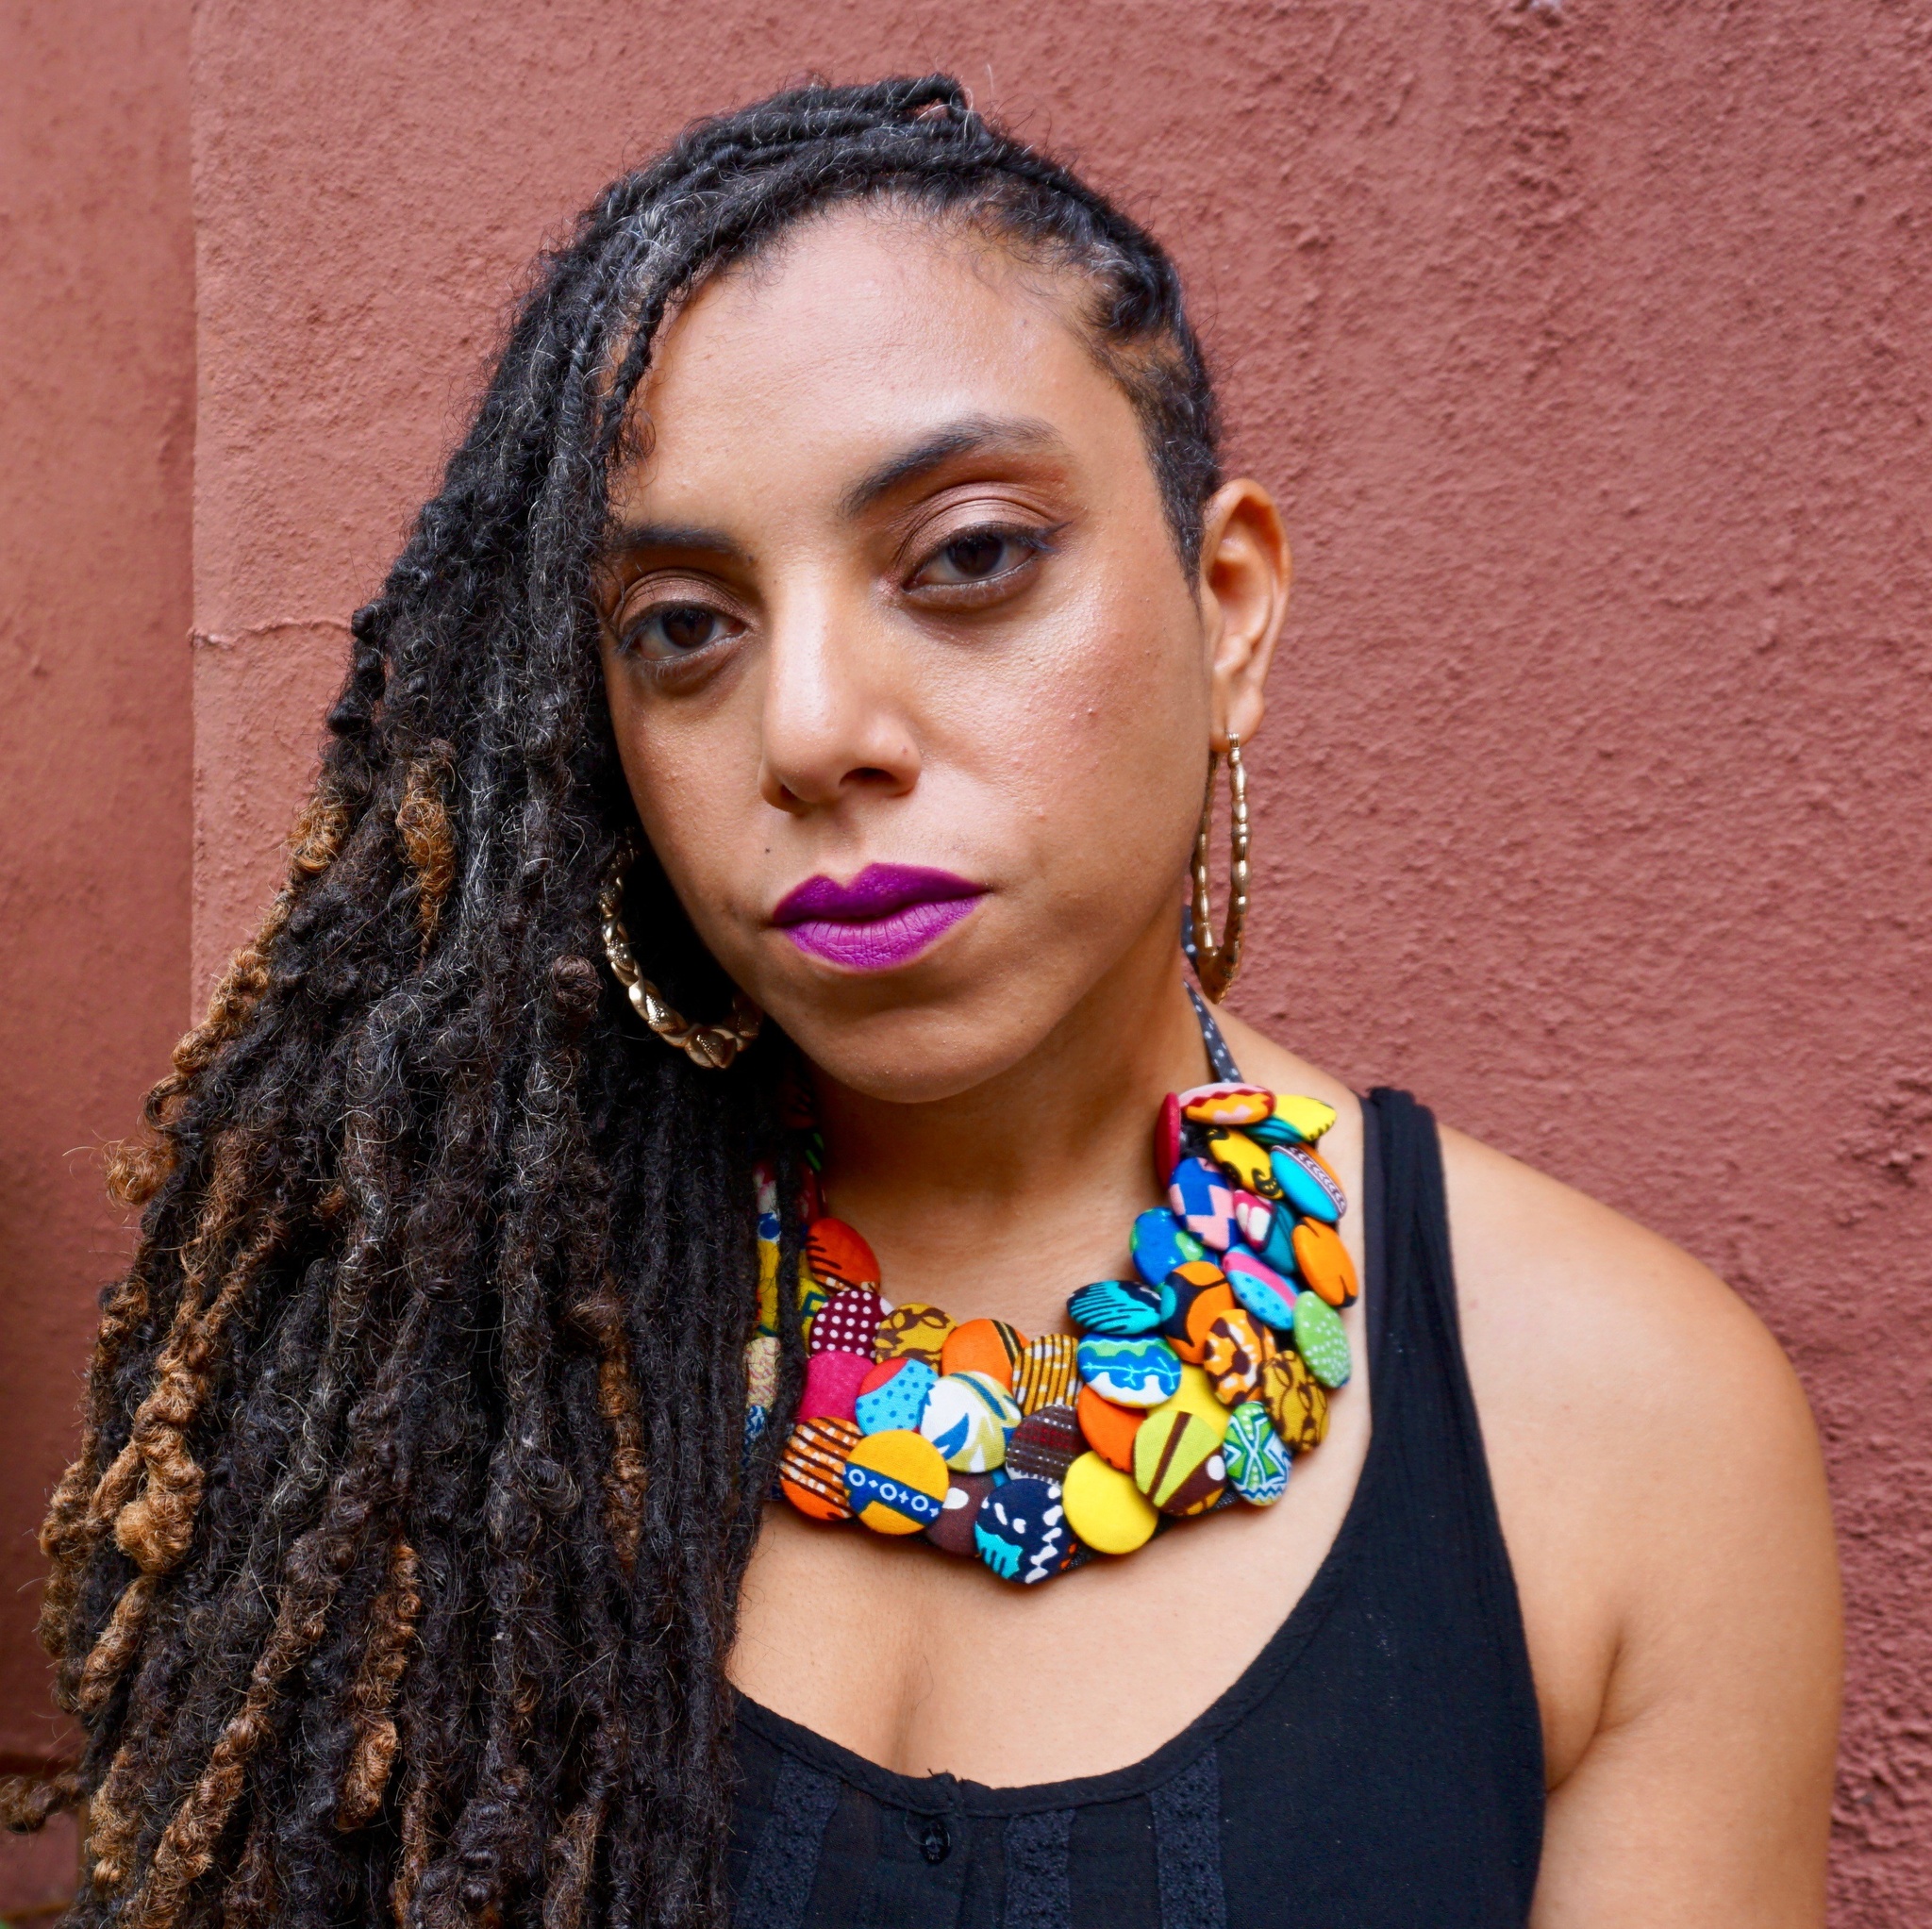 Artist Nia O. Witherspoon poses against a burnt-red wall. She looks into the camera while wearing a wide multicolored necklace made of overlapping discs and has her hair falling over the right side of her face and shoulder. 